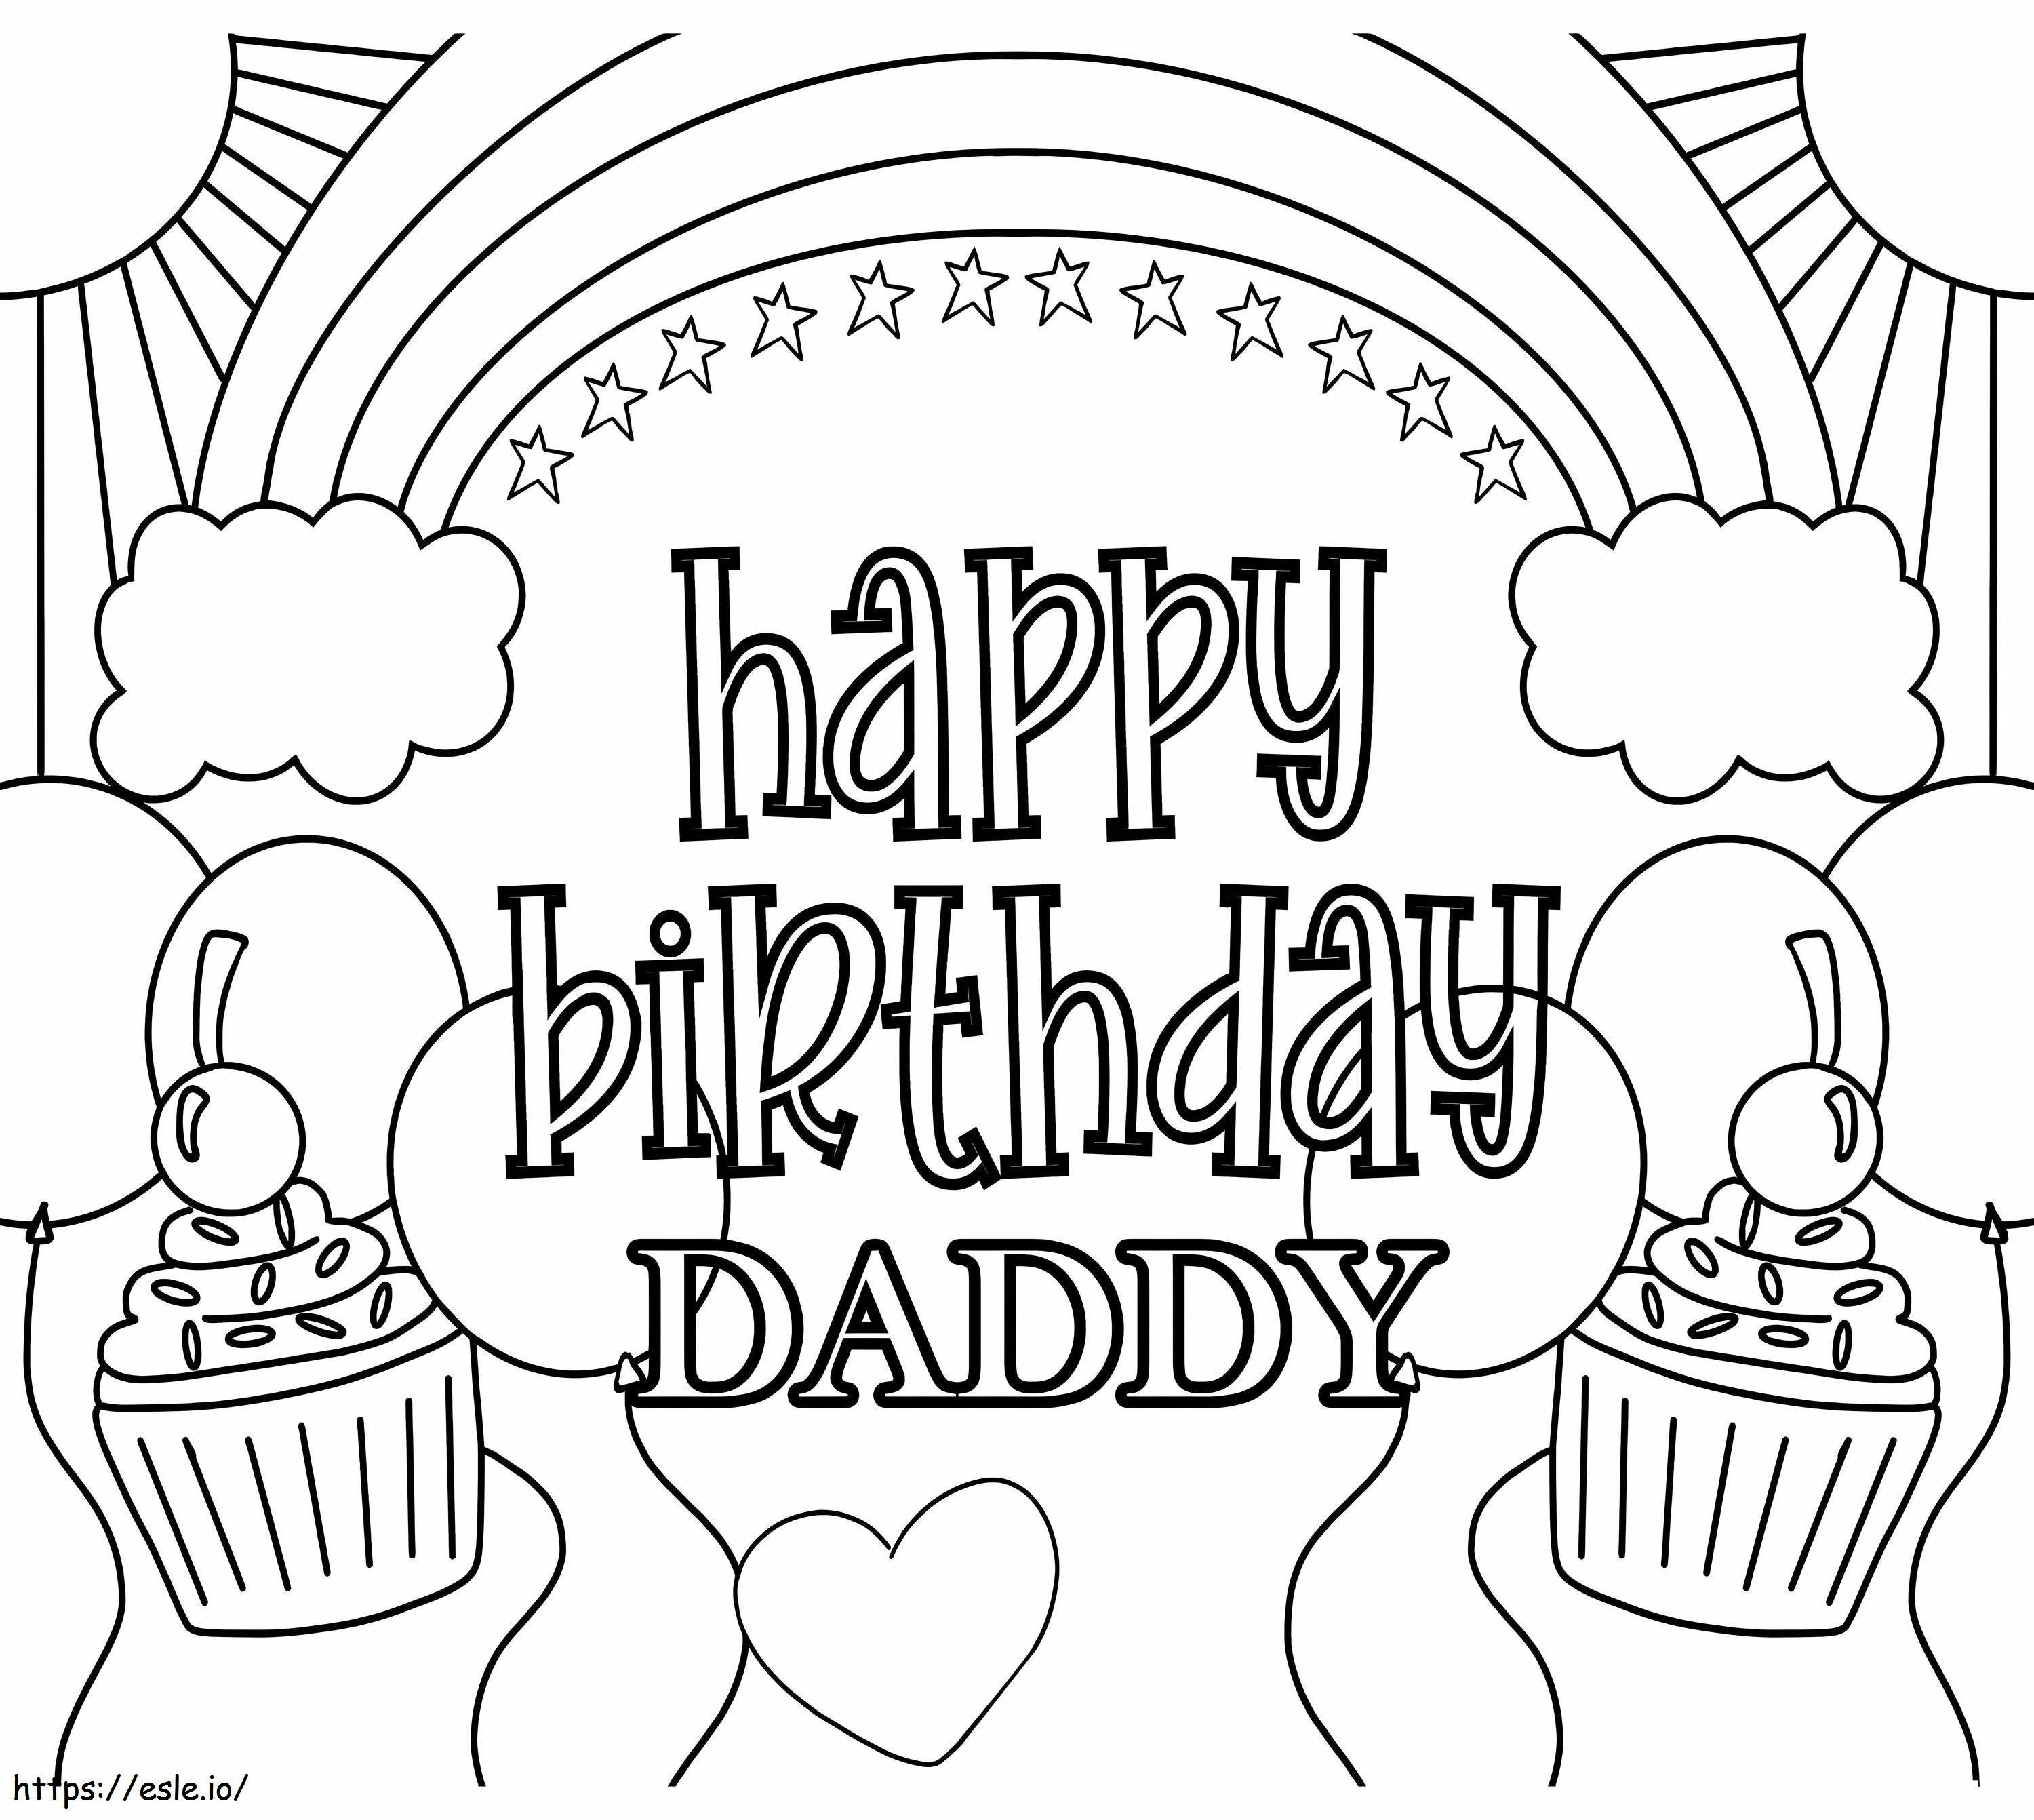 Happy Birthday Daddy Poster coloring page